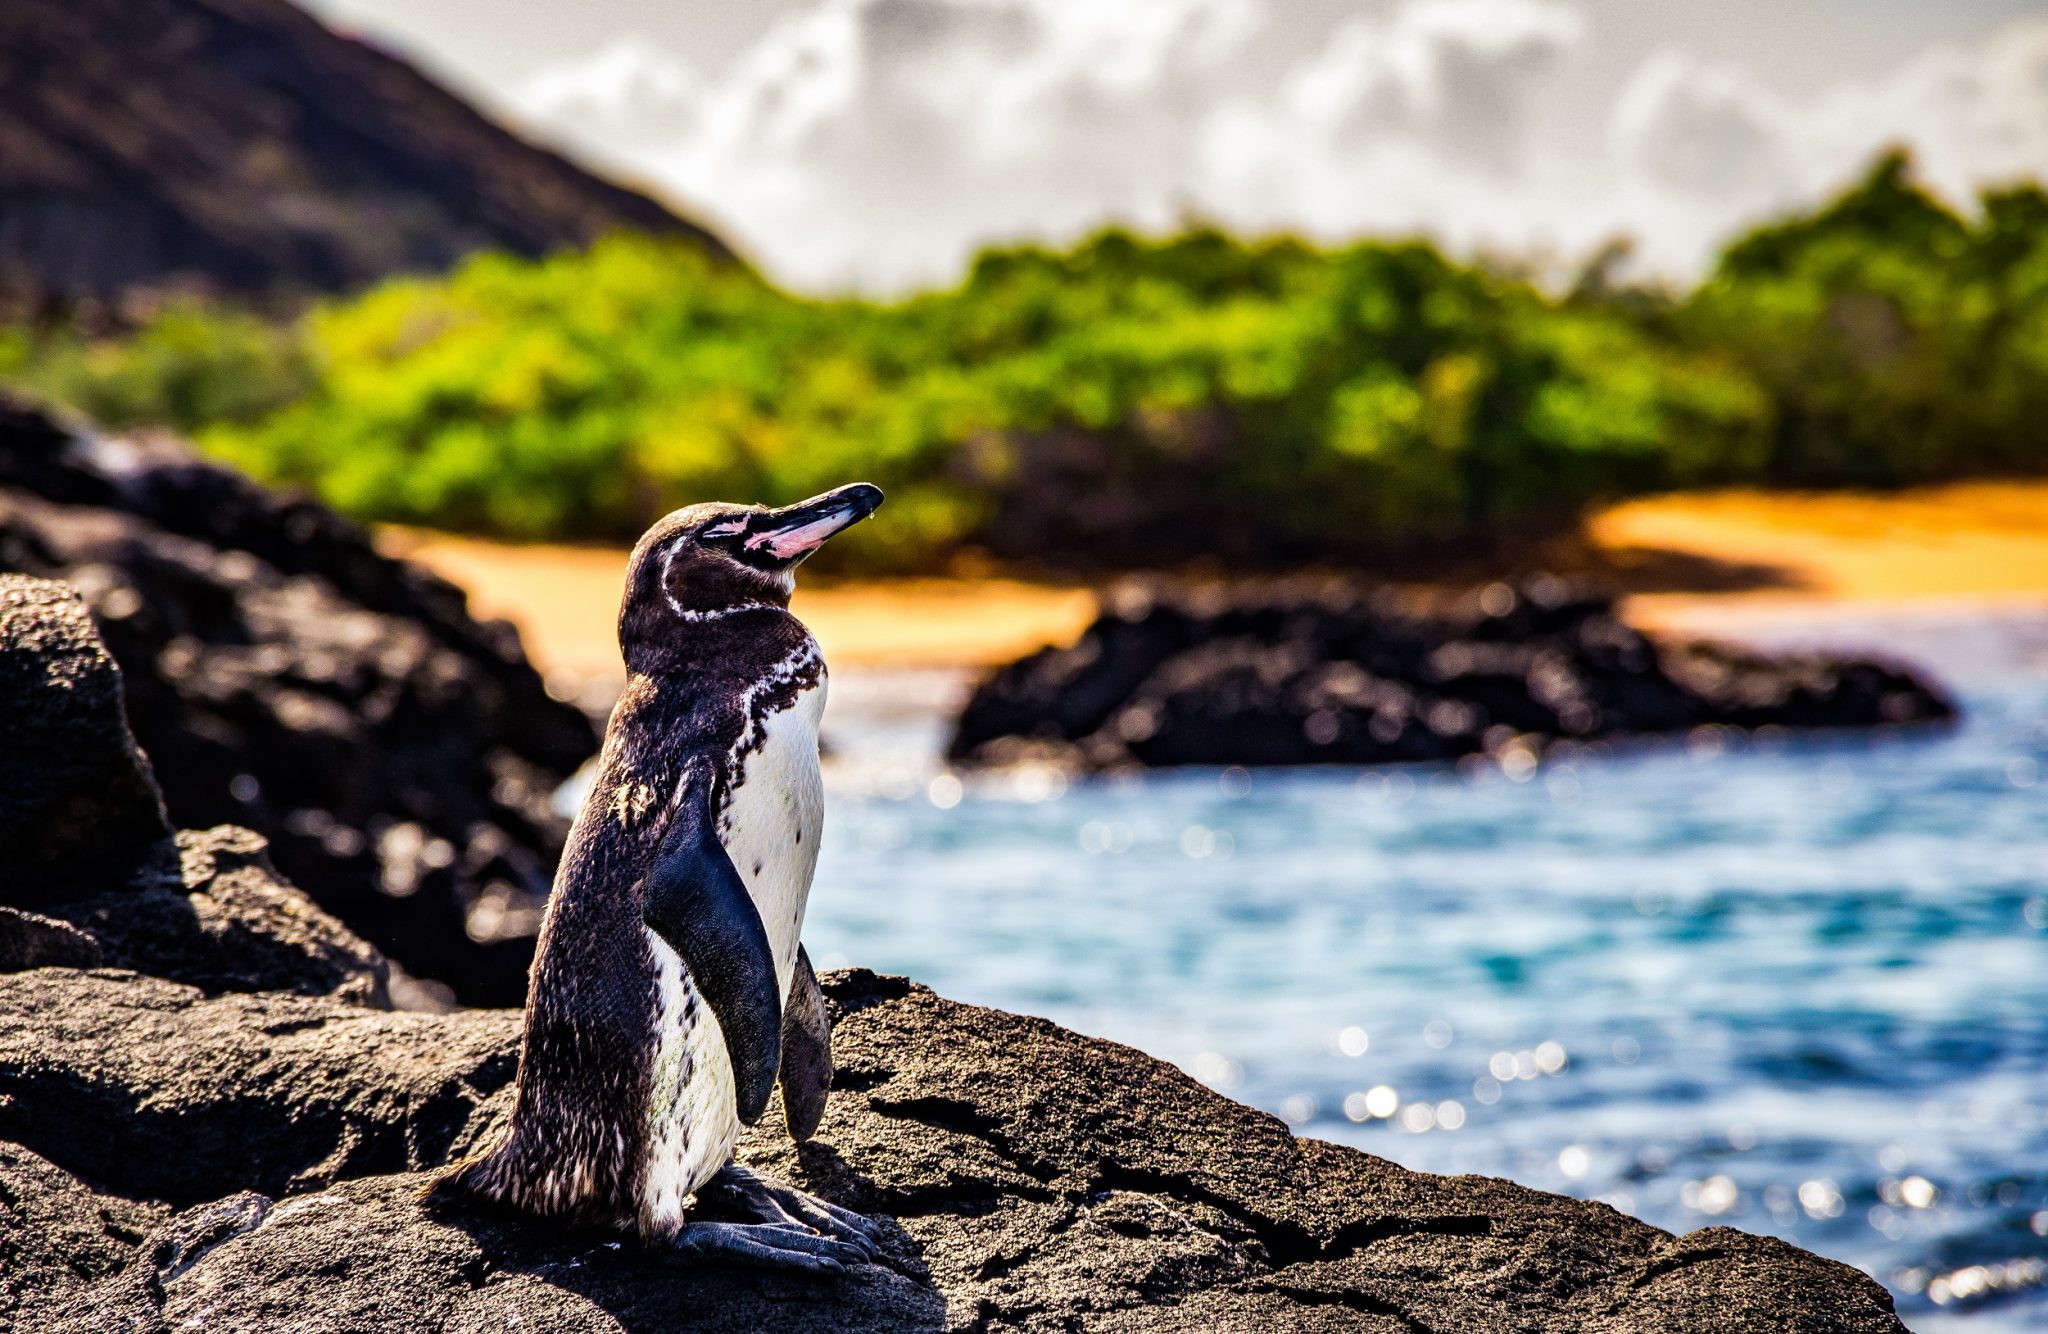 Endemic marine animals in the Galapagos, a Galapagos penguin